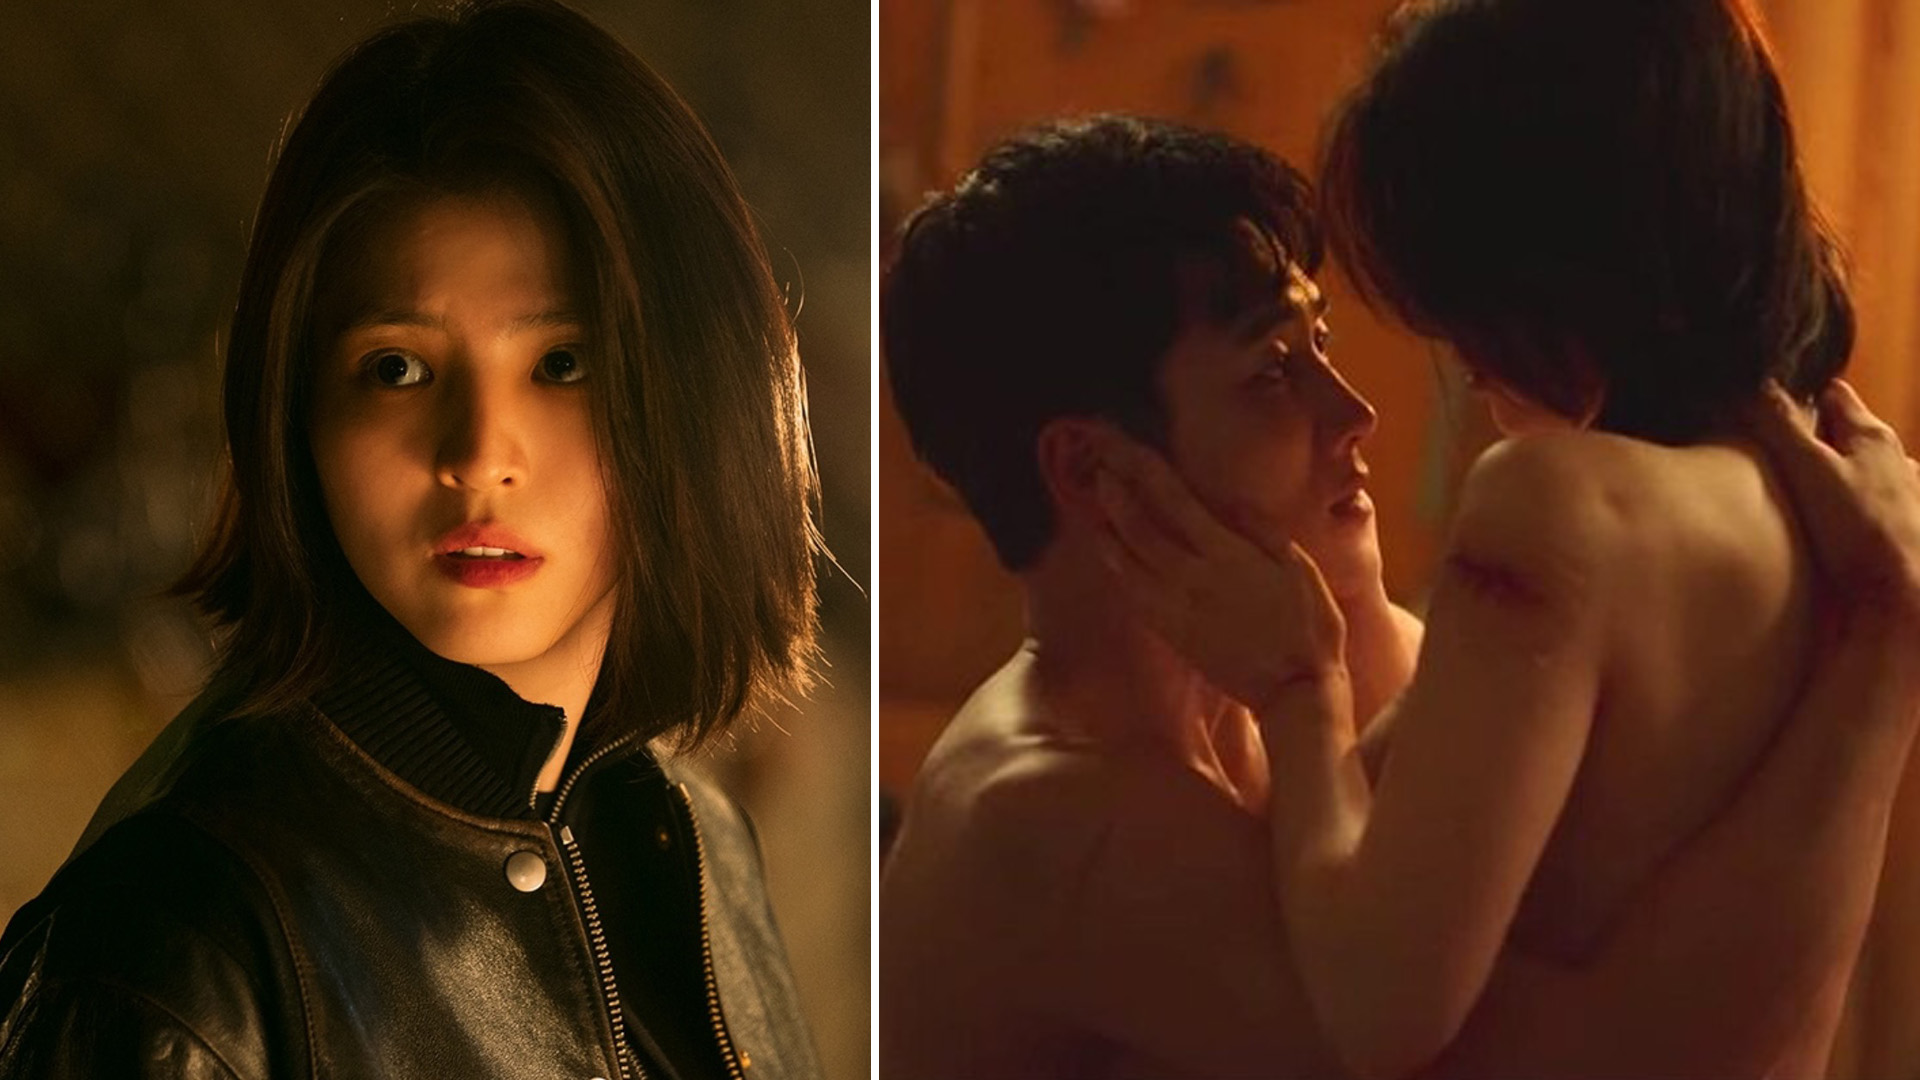 Fuck Korean Actress - Korean Star Han So Hee, Who Said She Didn't Know She Had To Shoot A Topless  Sex Scene In Netflix Drama My Name, Now Says She Was Aware Of It - 8days